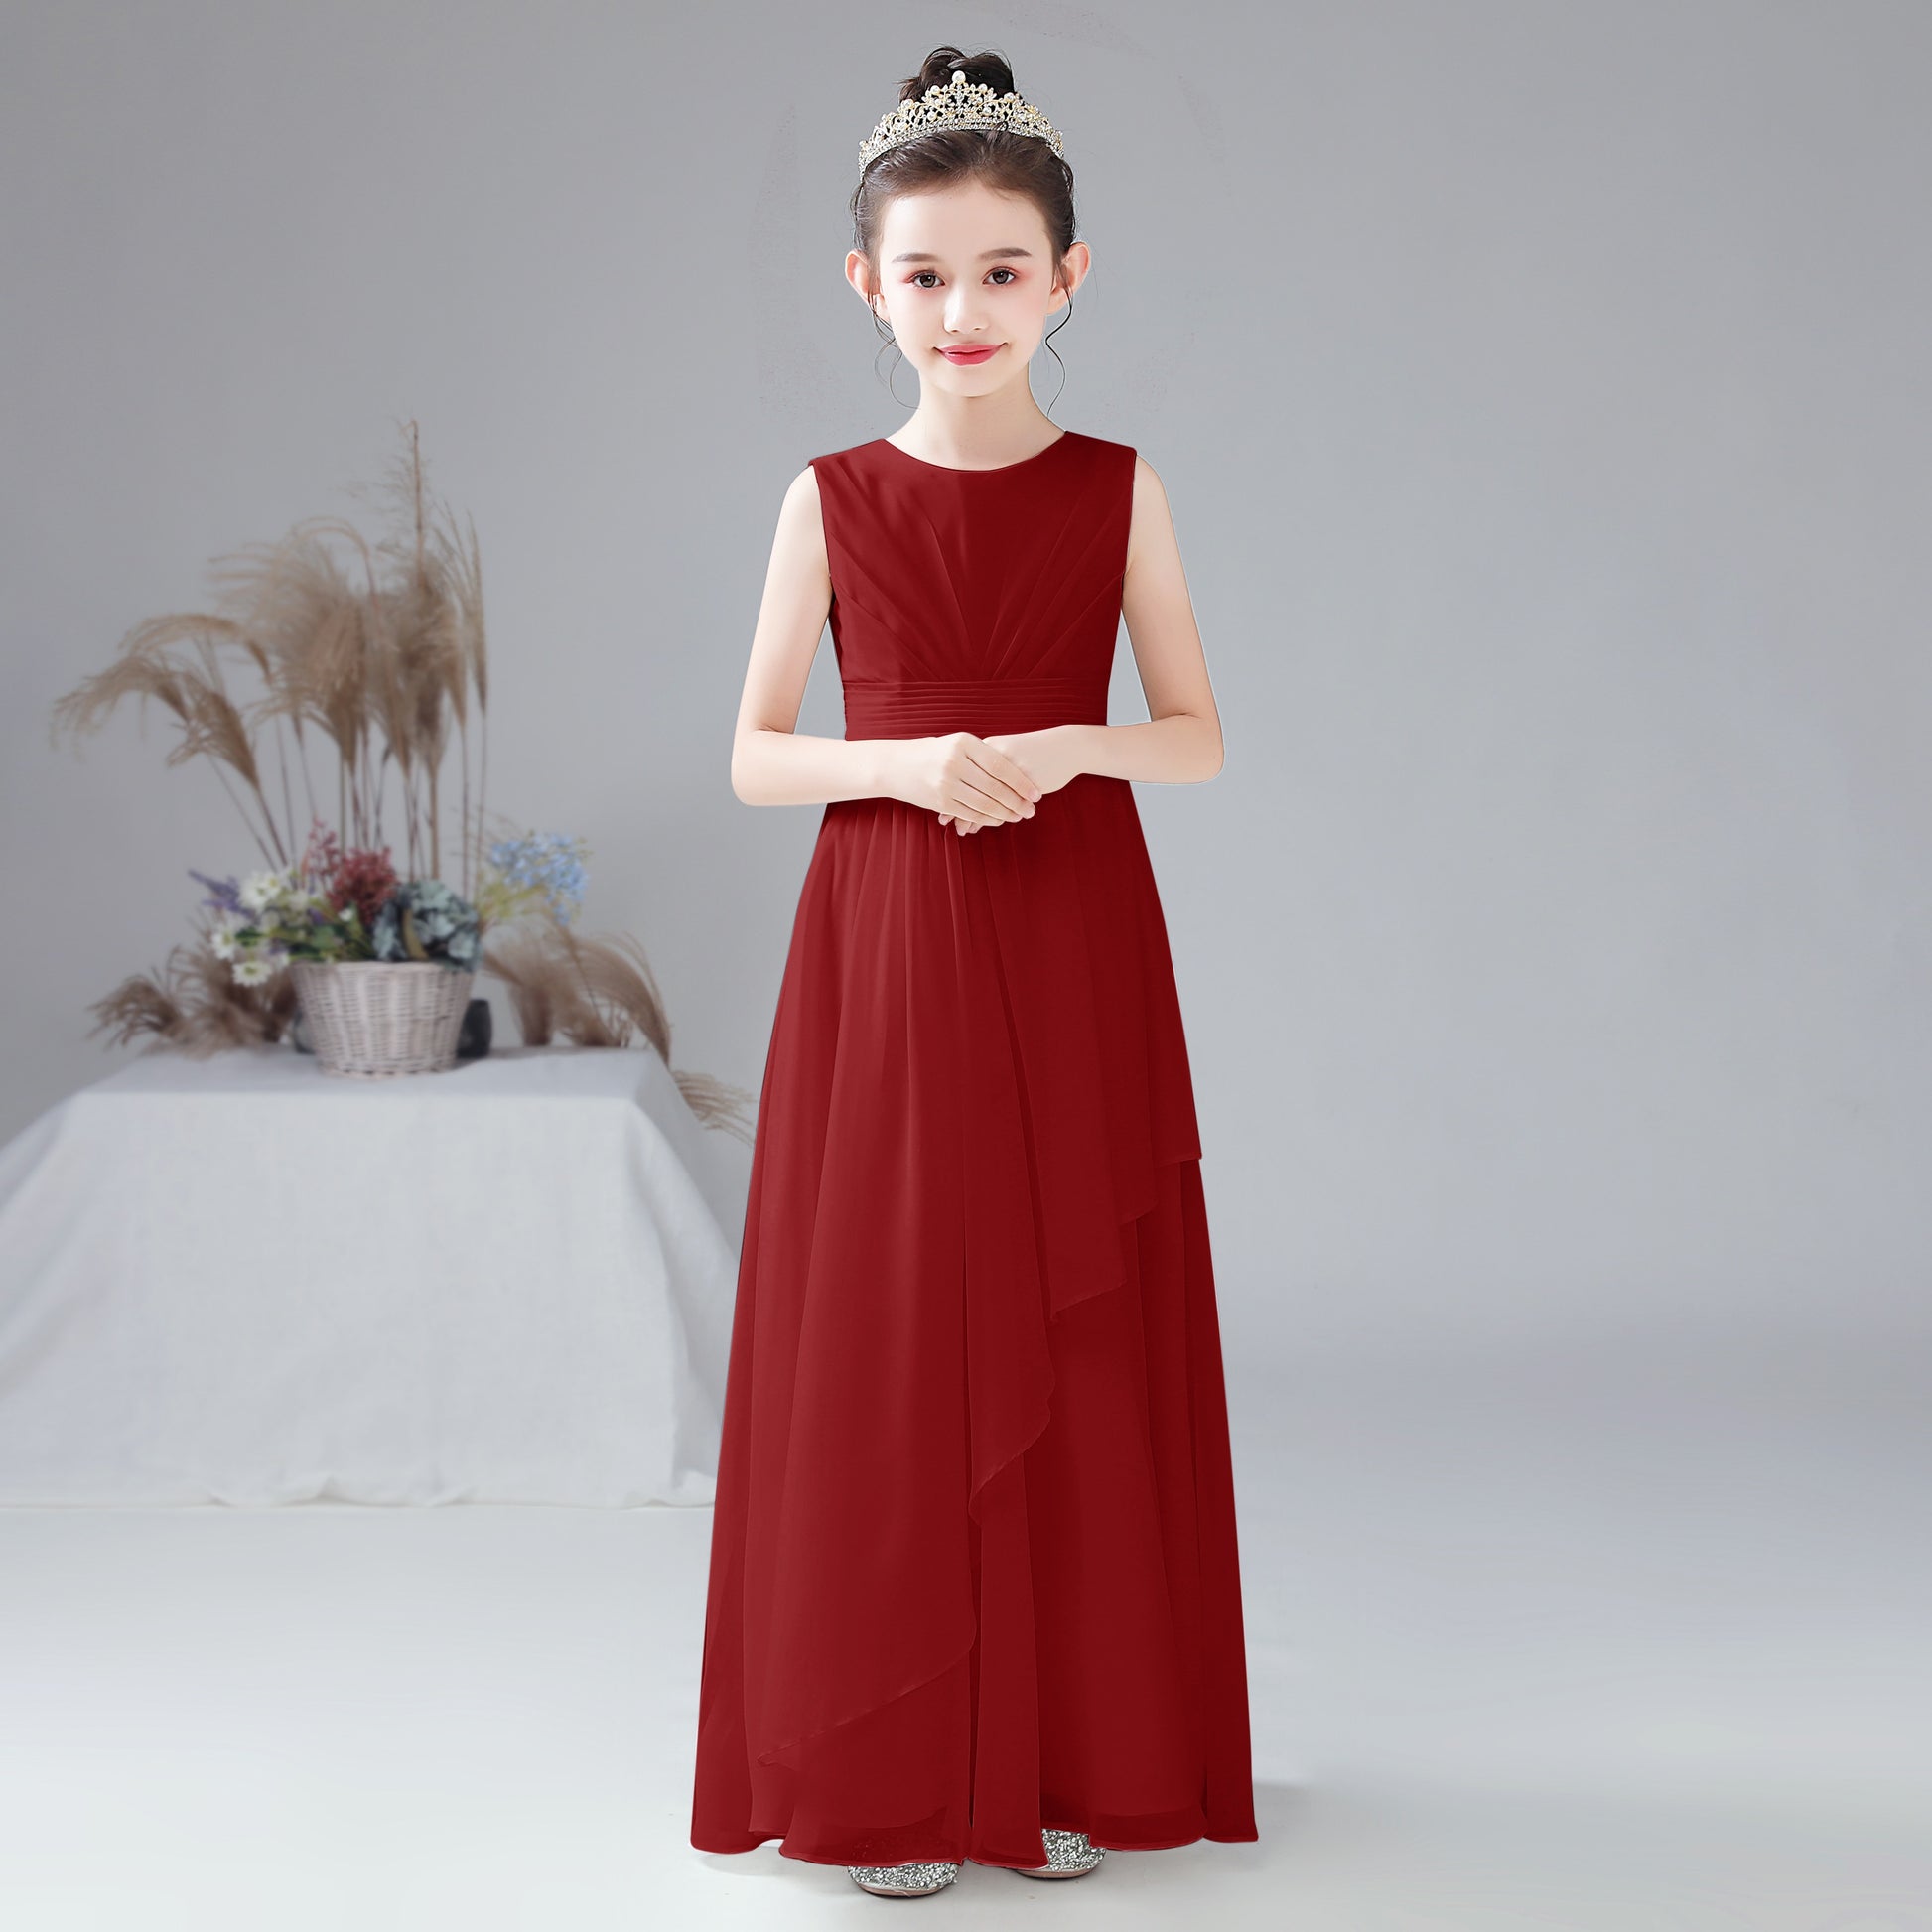 Vestido para Niña Real Pictures Chiffon Flower Girl Dress For Wedding Party First Communion Little Bride Gowns Junior Bridesmaid Rojo